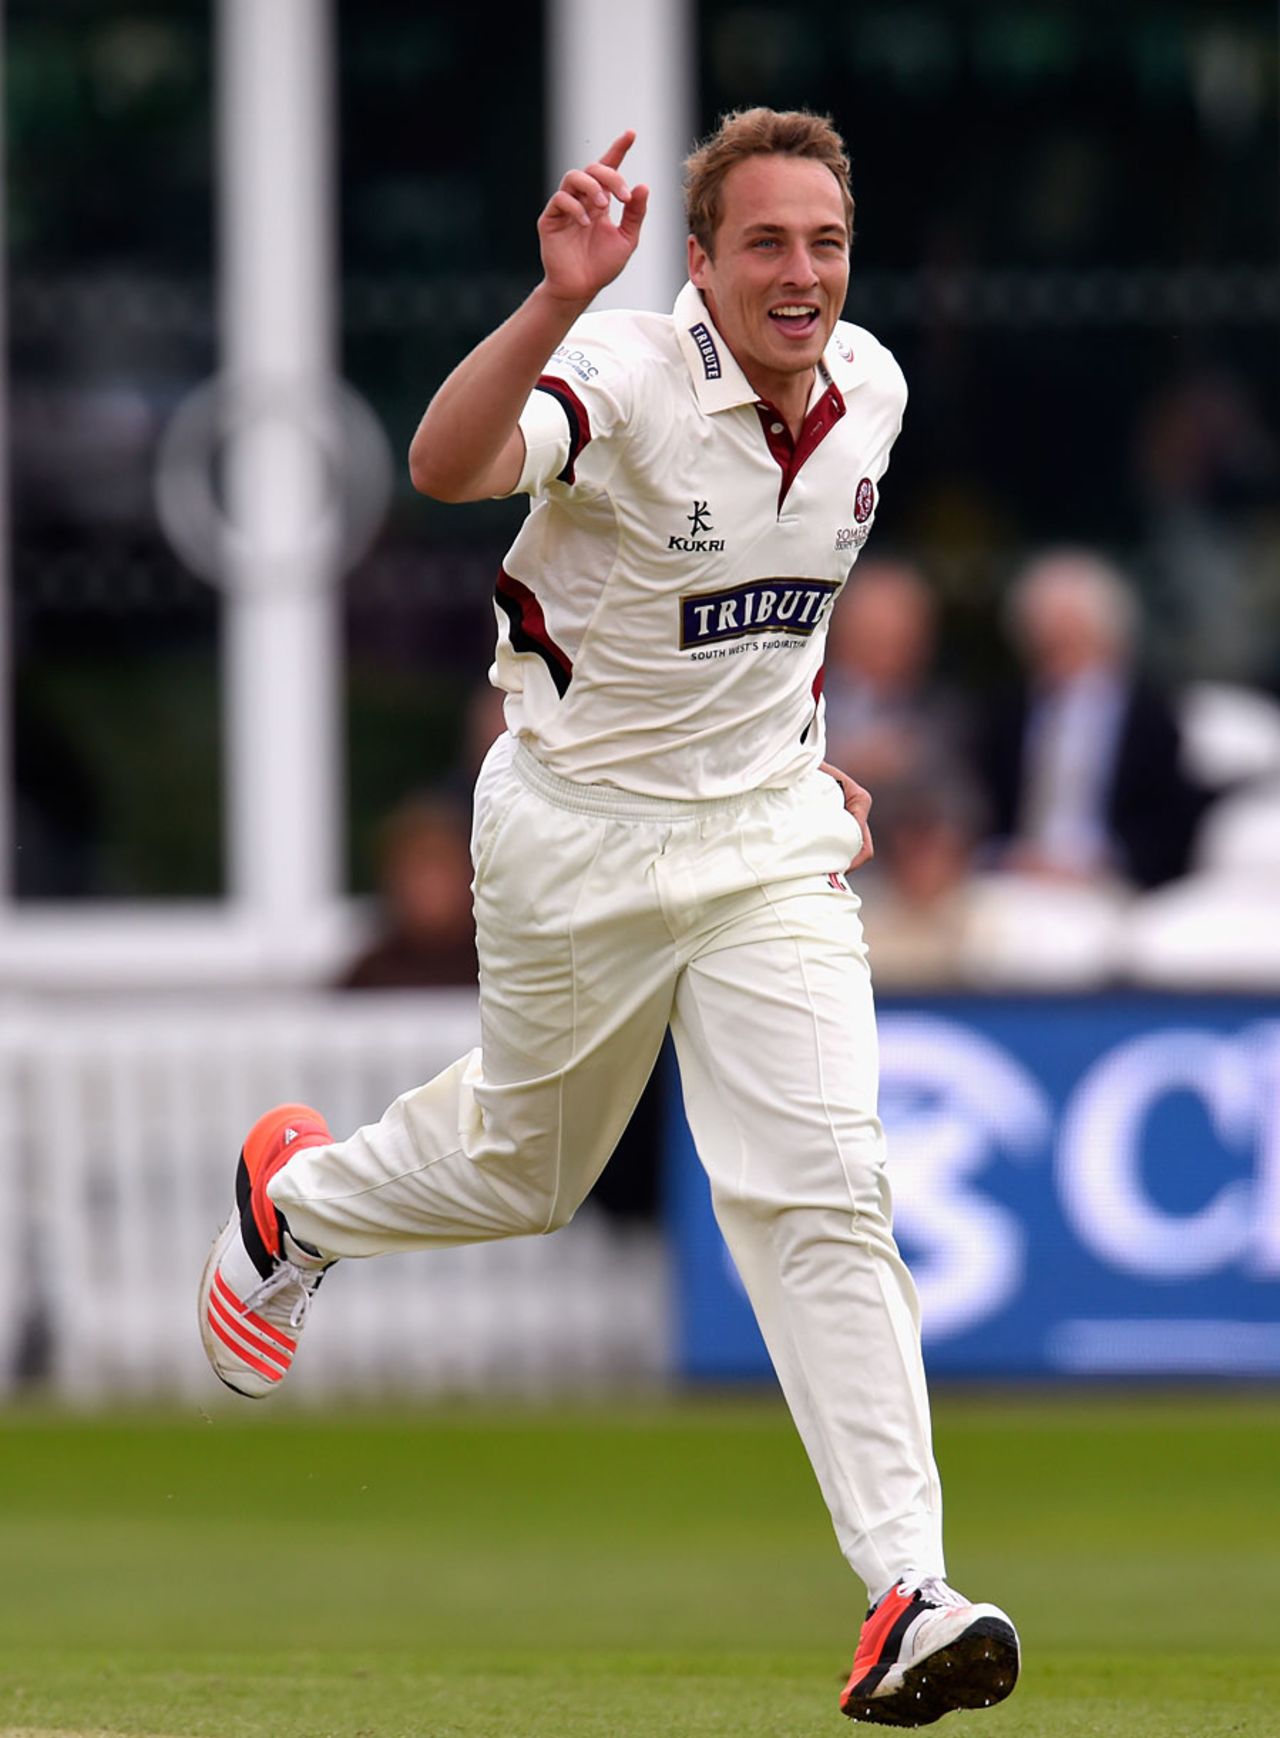 Josh Davey removed both the New Zealand openers, Somerset v New Zealanders, Tour match, 1st day, Taunton, May 8, 2015